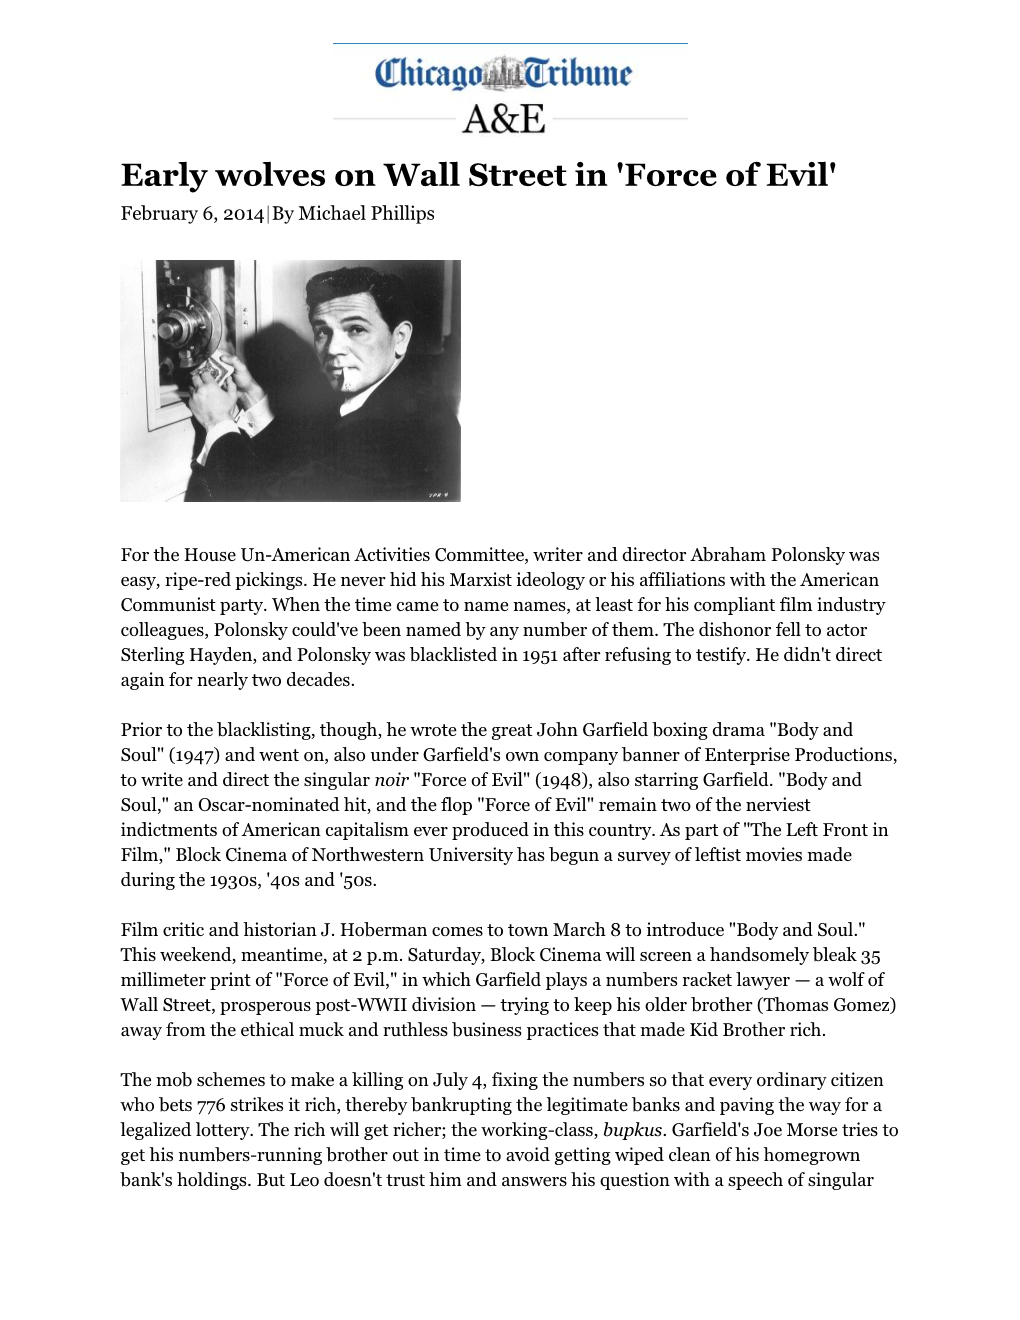 Early Wolves on Wall Street in 'Force of Evil' February 6, 2014|By Michael Phillips